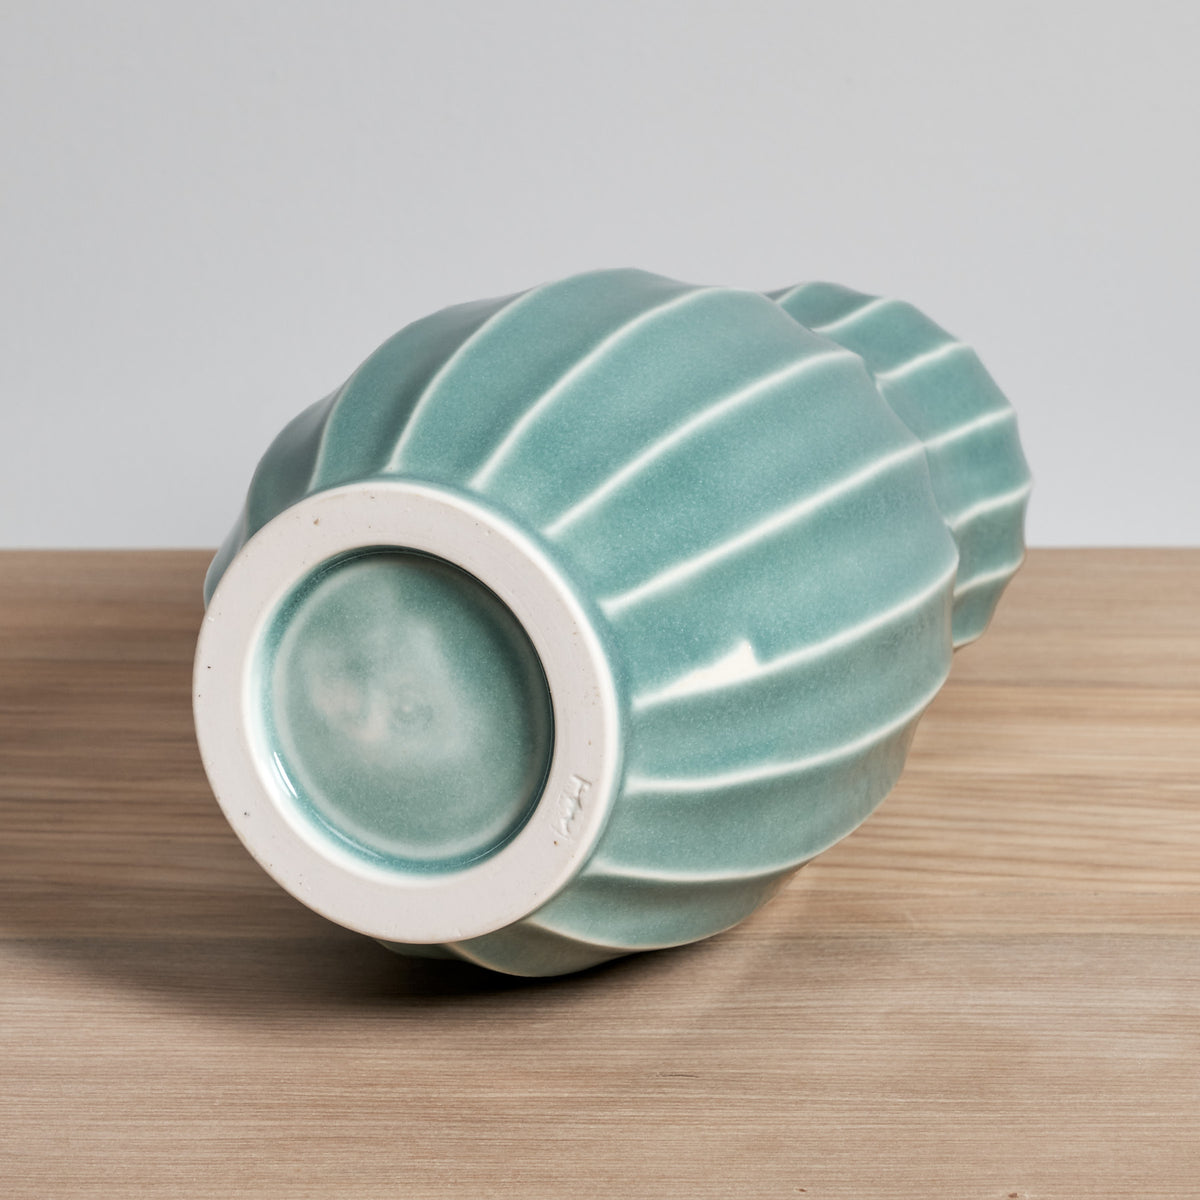 A Gourd Vase - Celadon from Jino Ceramic Studio sitting on top of a wooden table.